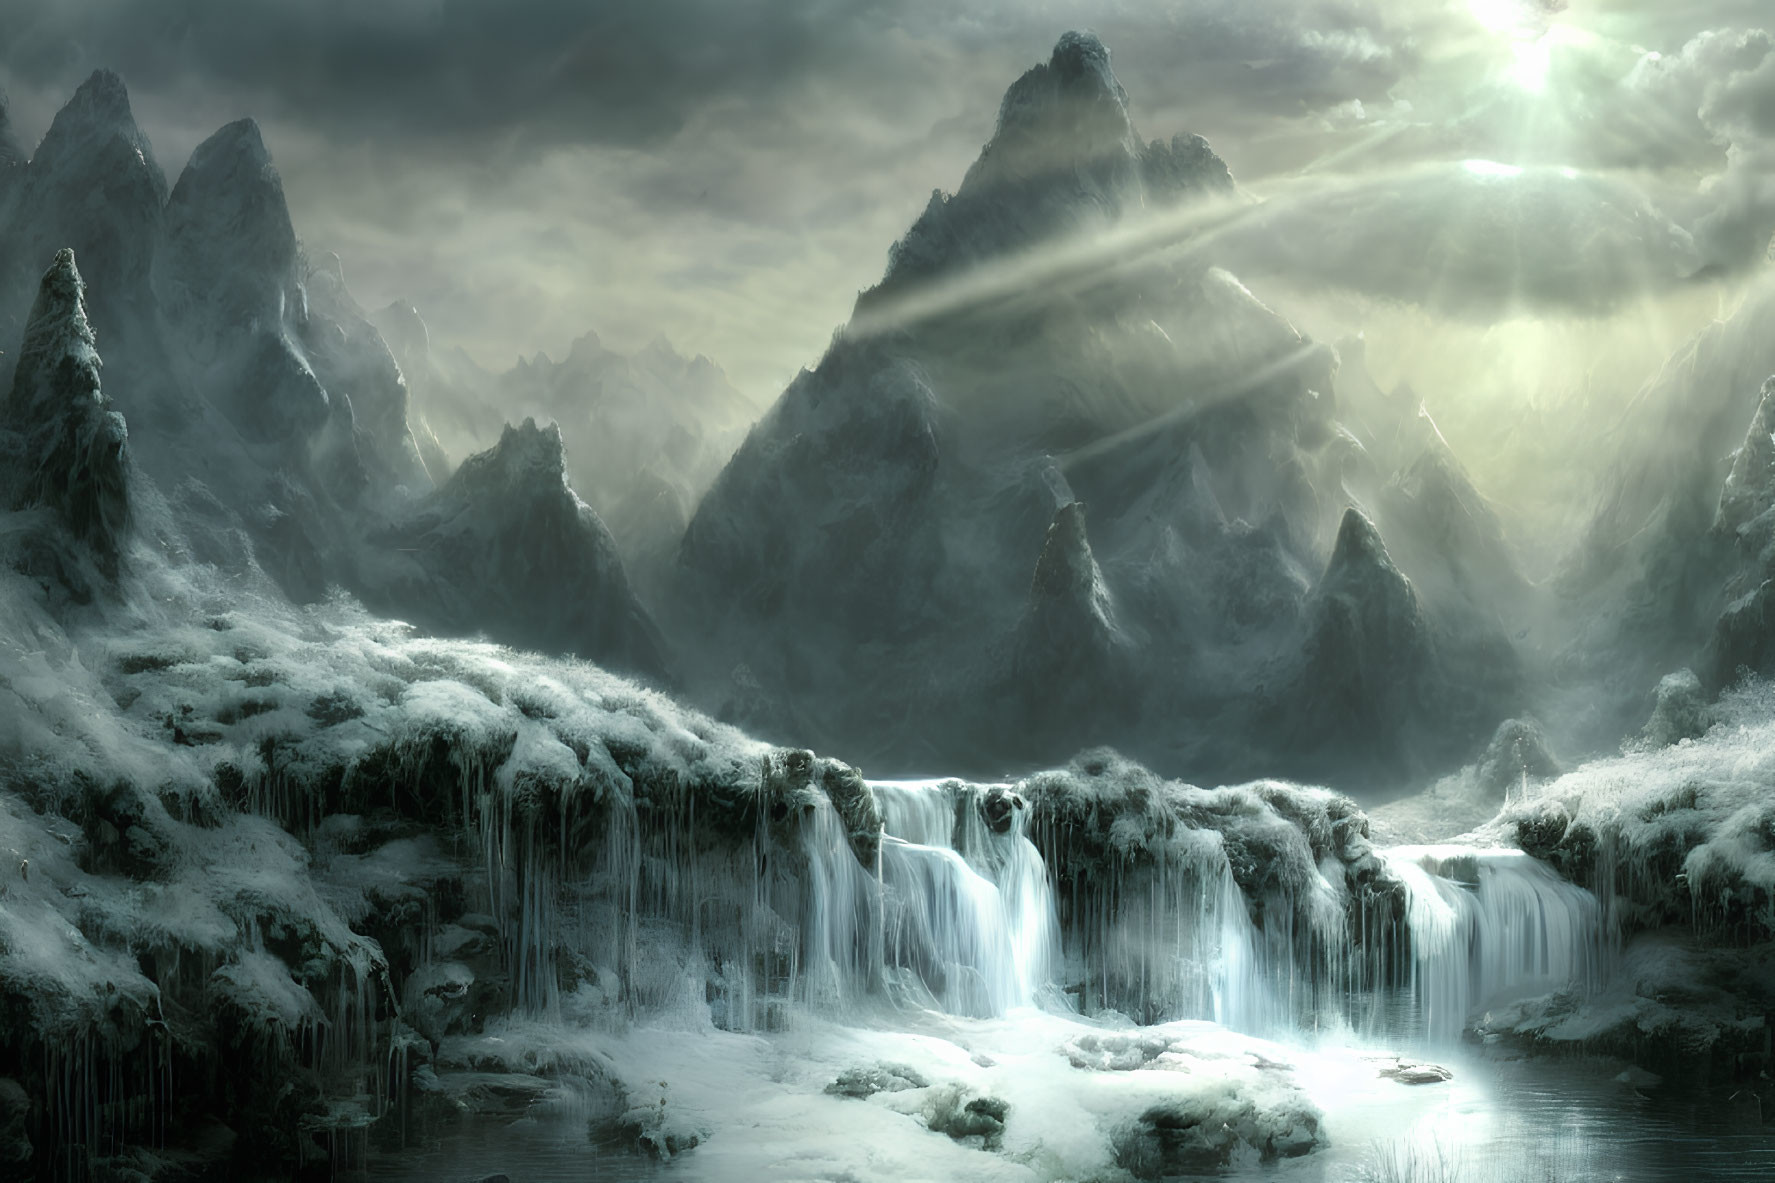 Mystical snowy landscape with mountains, waterfalls, ice formations, and sunlight rays